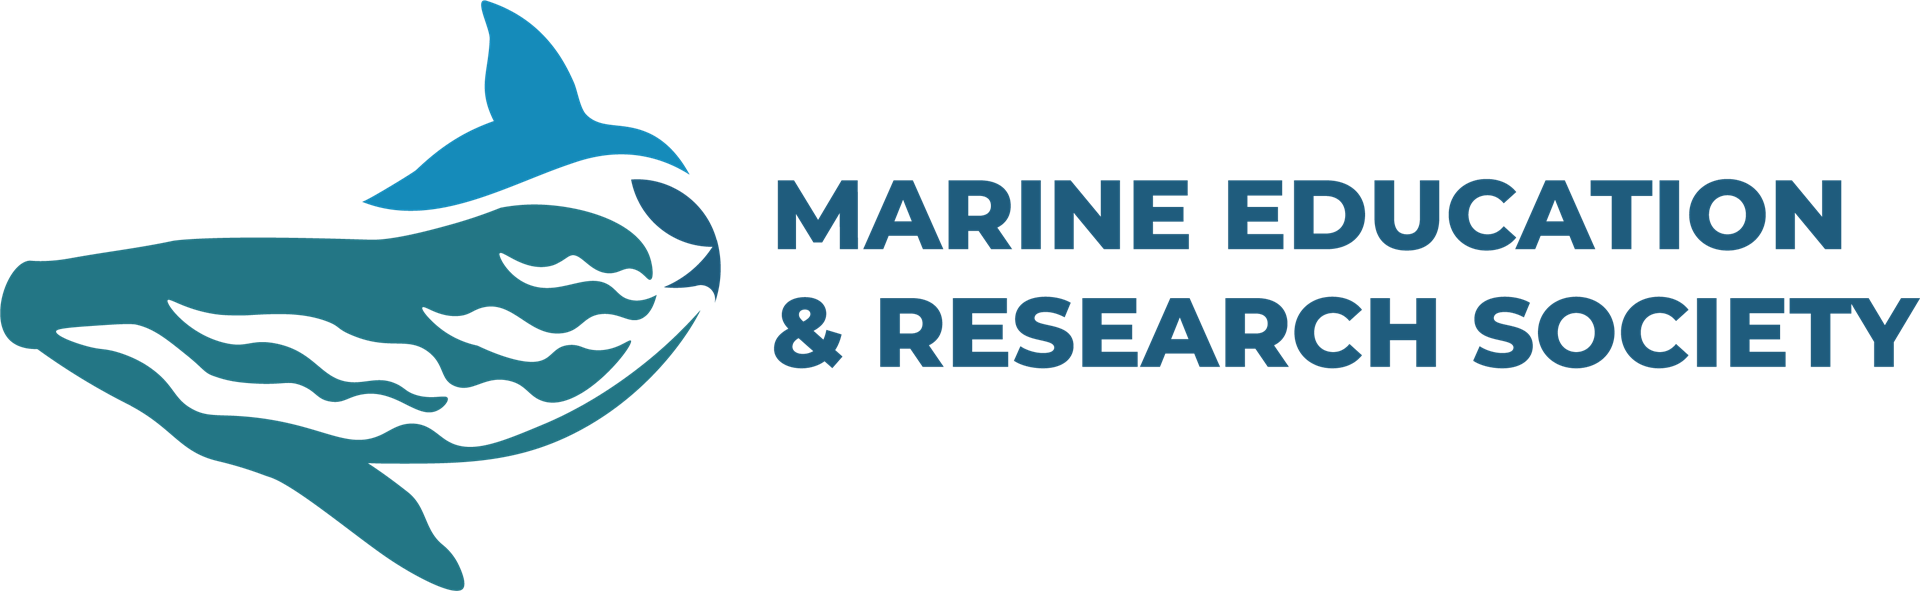 Marine Education Research Society